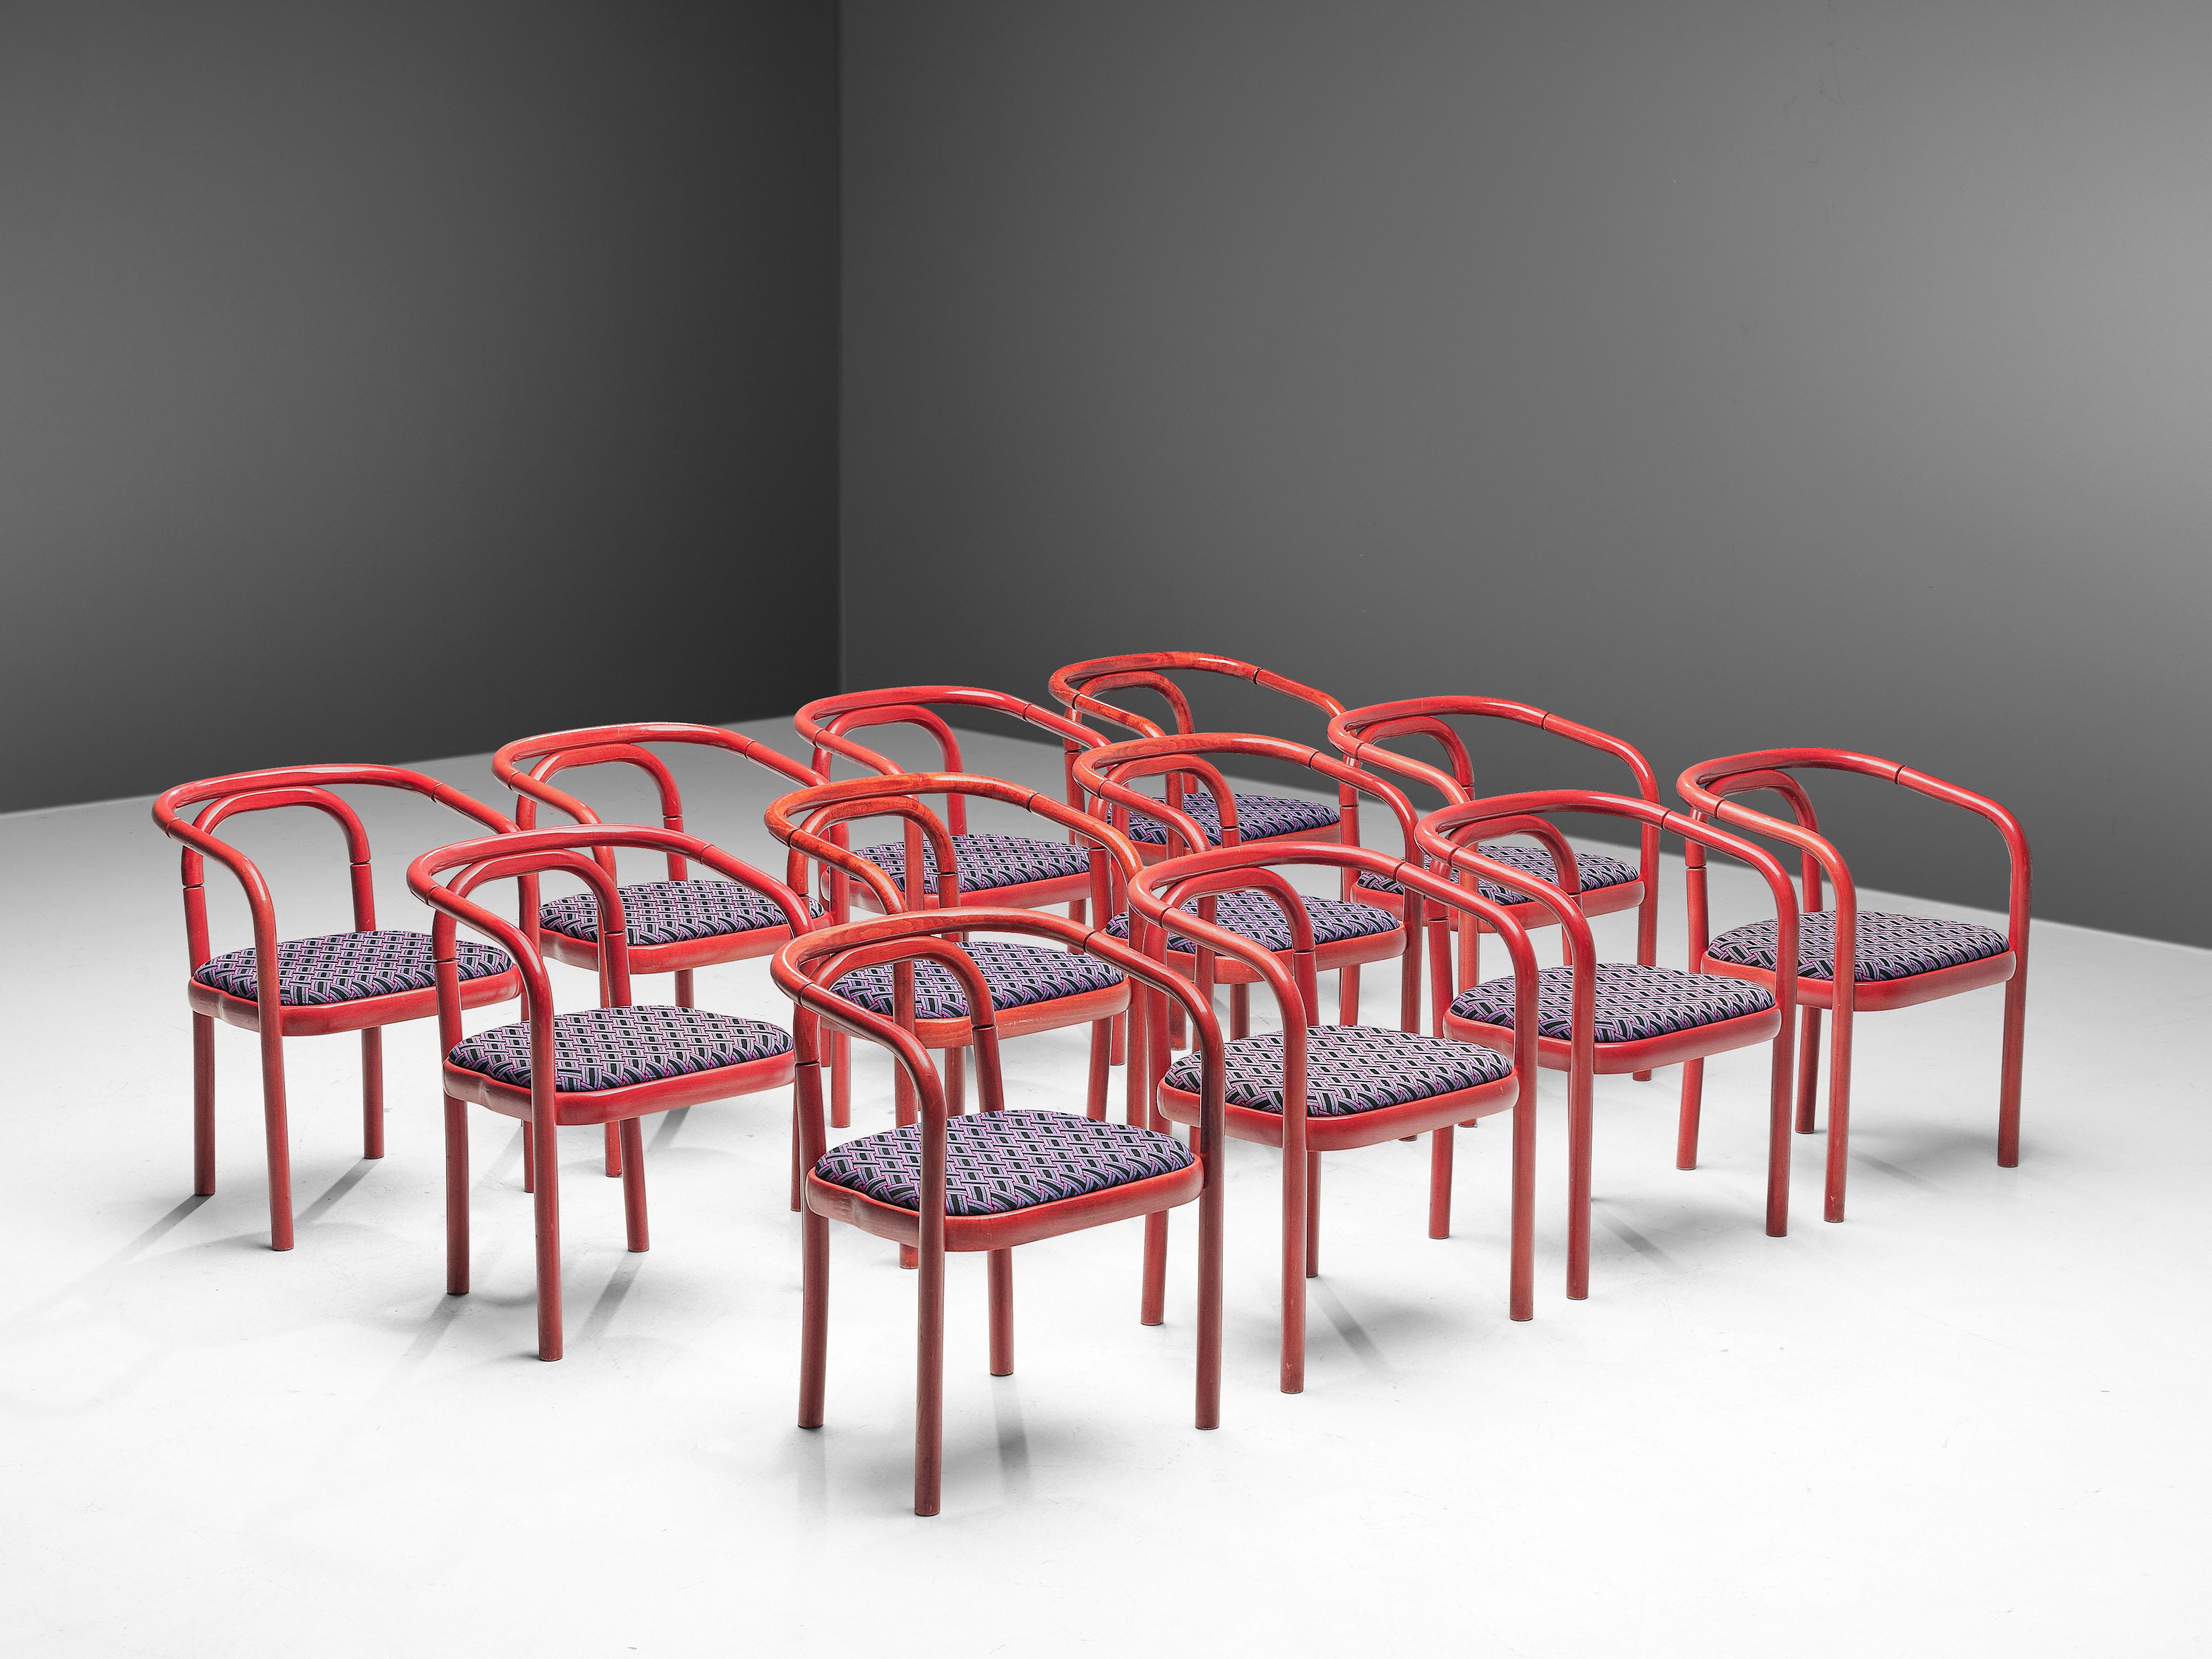 Antonin Suman for TON, +75 armchairs, lacquered beech, fabric, Czech Republic, 1977

A large set of dining chairs that are manufactured by Ton. These chairs feature a wonderful bentwood frame that is colored in an eye-catching red tone. Engraved